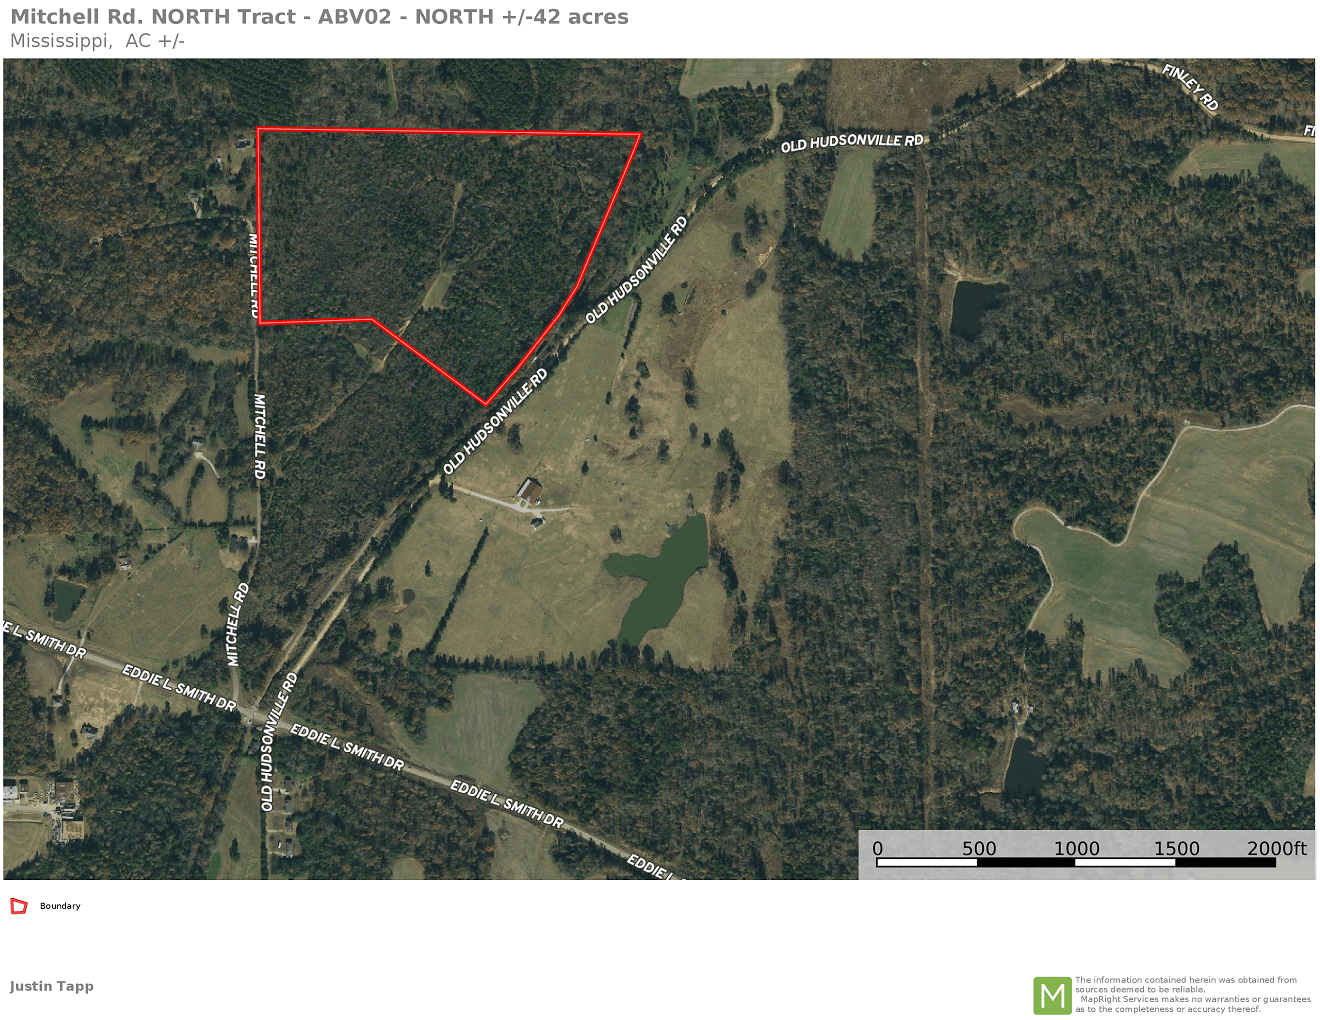 12 Aerial Map ABV02 NORTH 42 acres.png